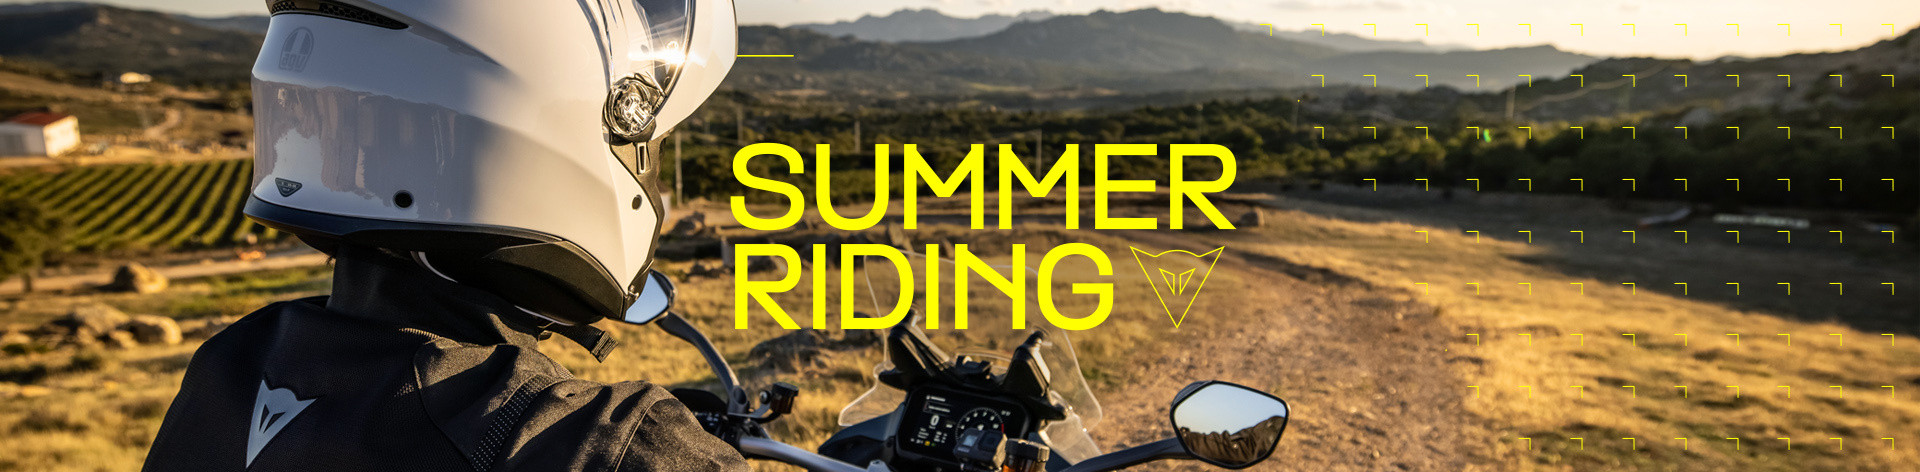 Dainese Summer Riding